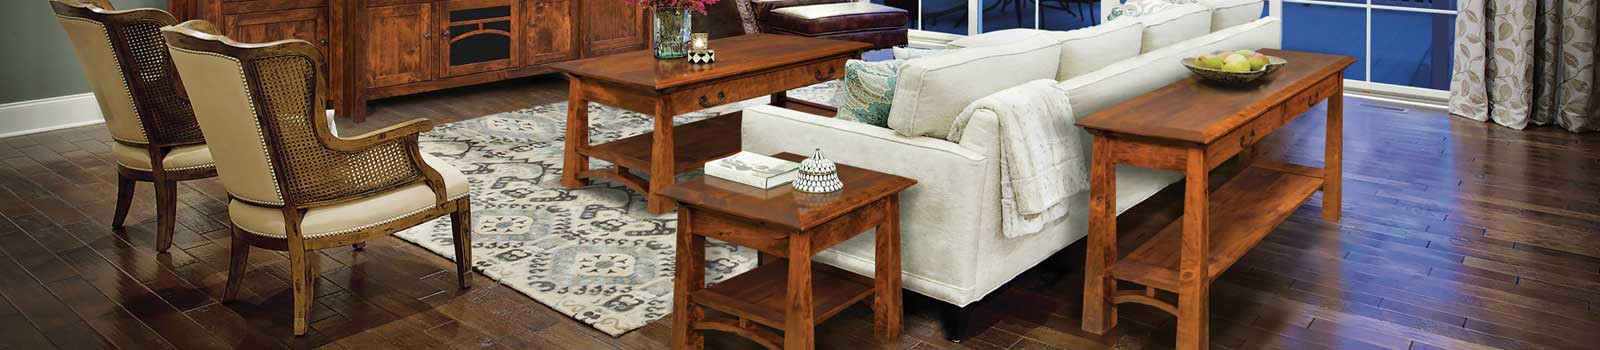 amish living room furniture closeout price